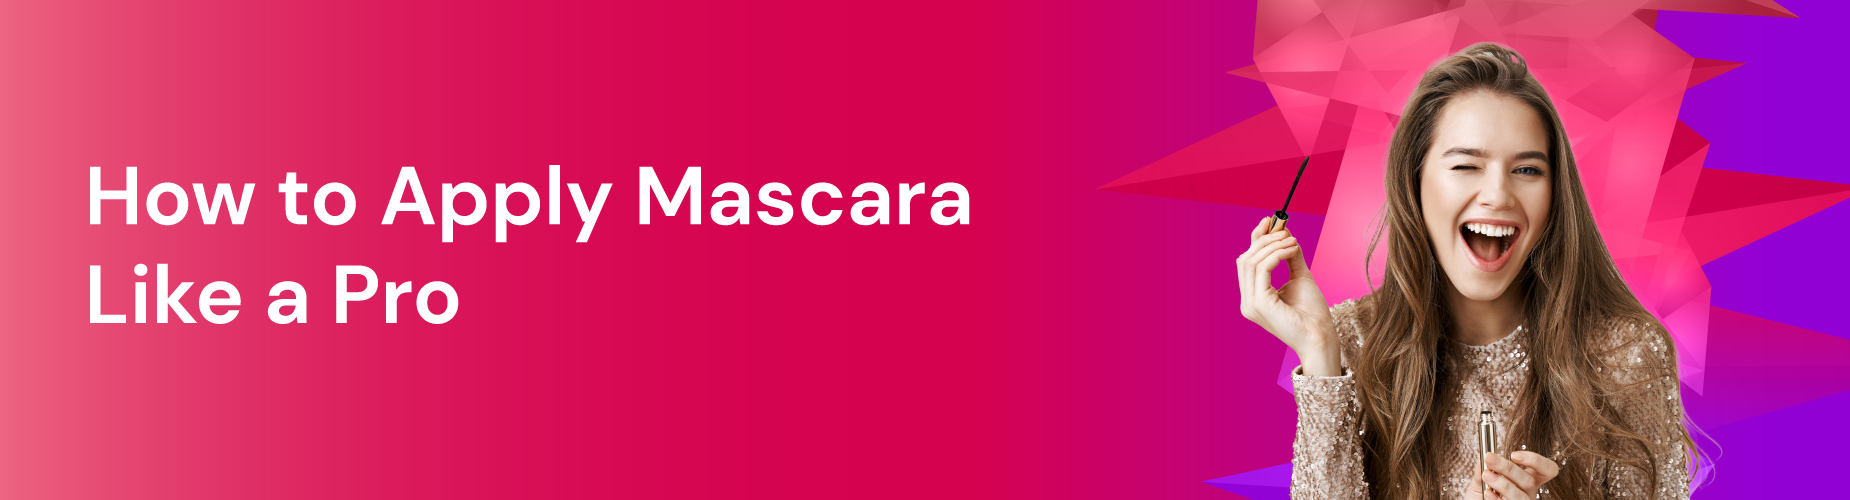 How to Apply Mascara guide